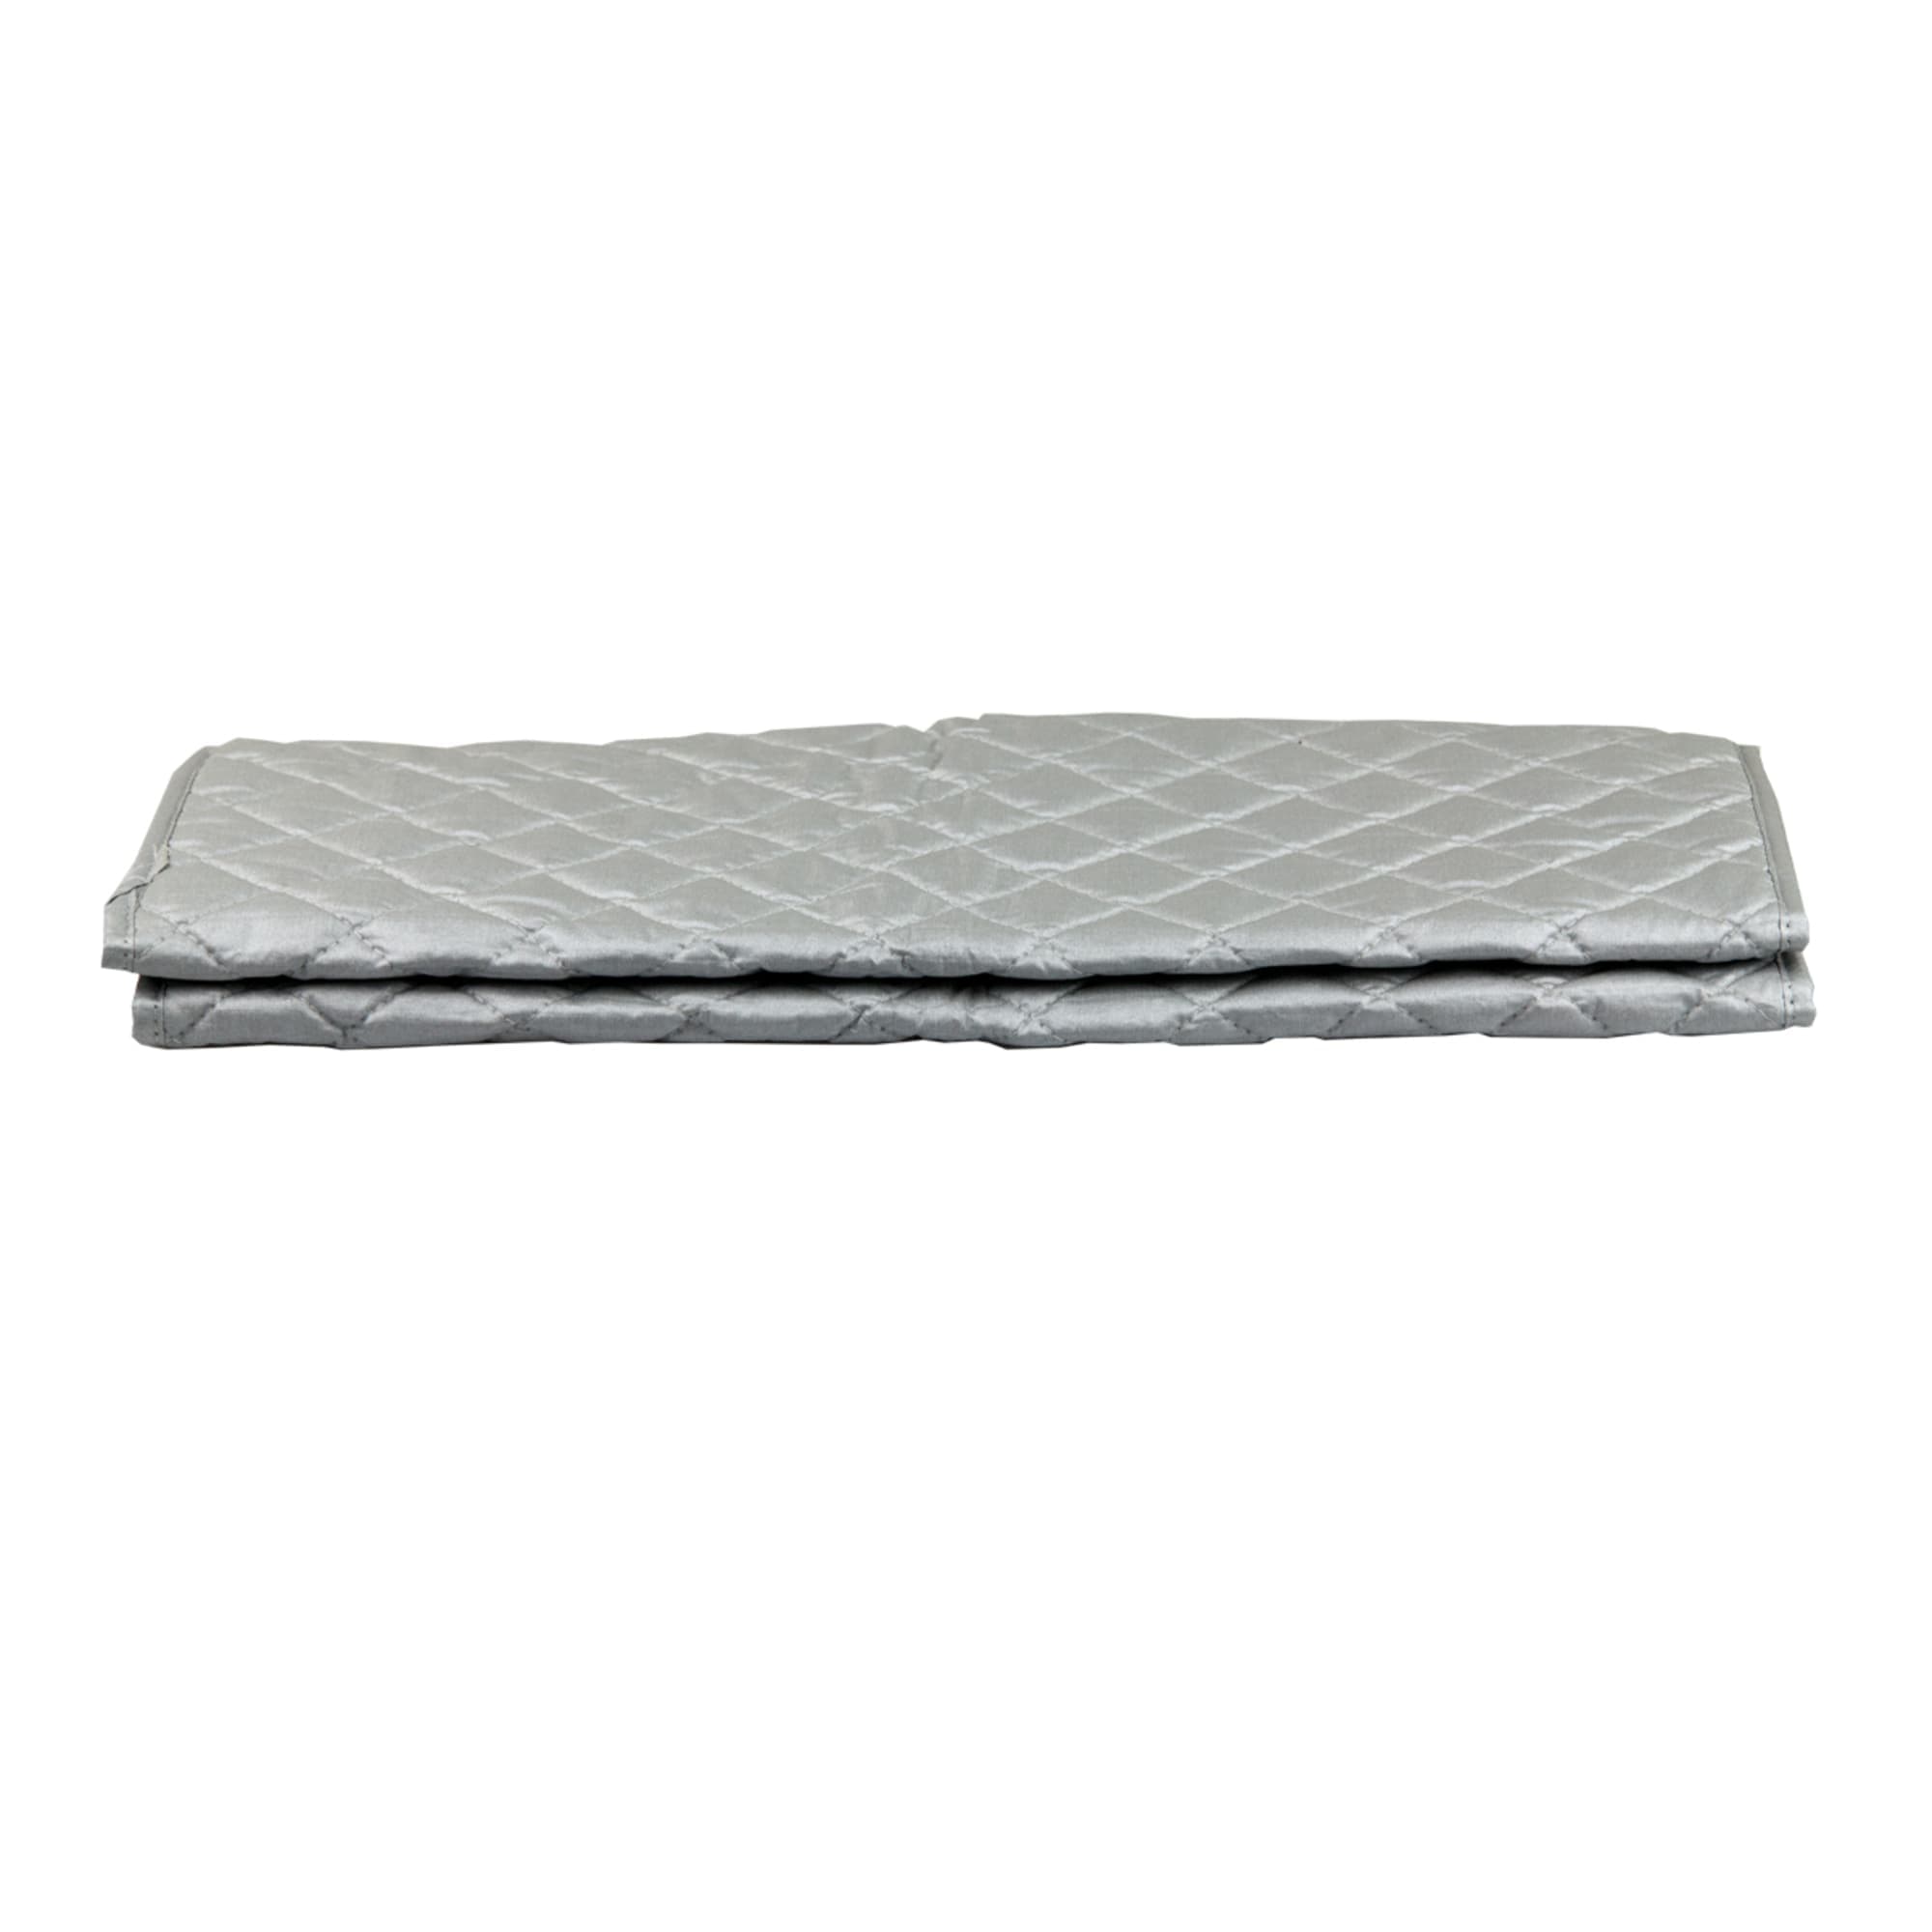 Home Basics Magnetic Ironing Mat, Silver $5.00 EACH, CASE PACK OF 6